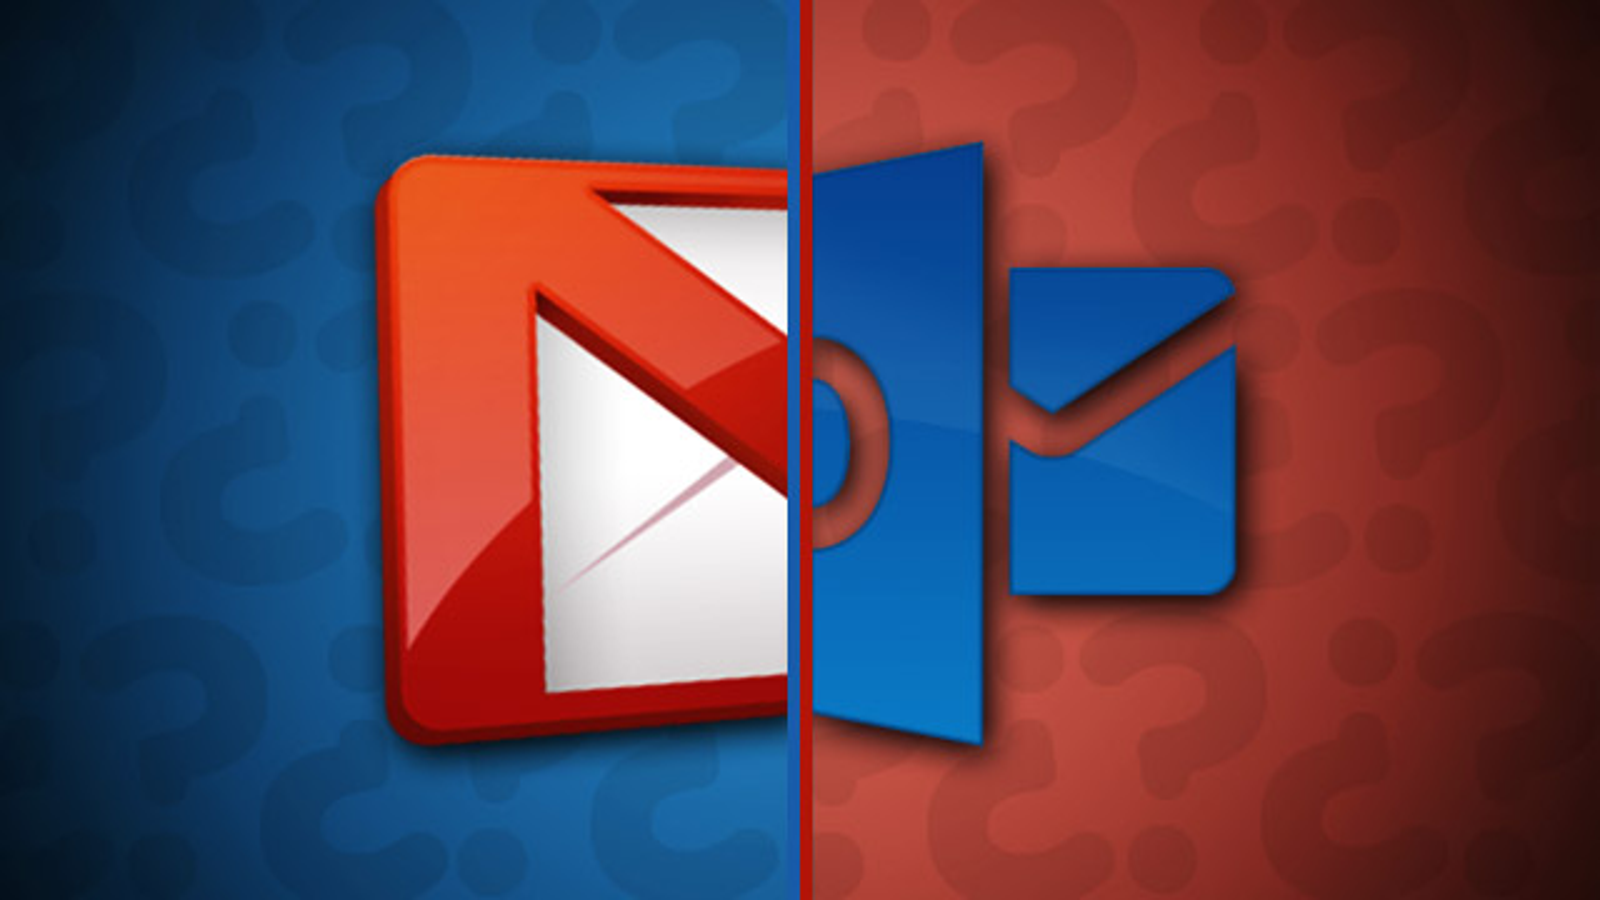 go for gmail vs made for gmail